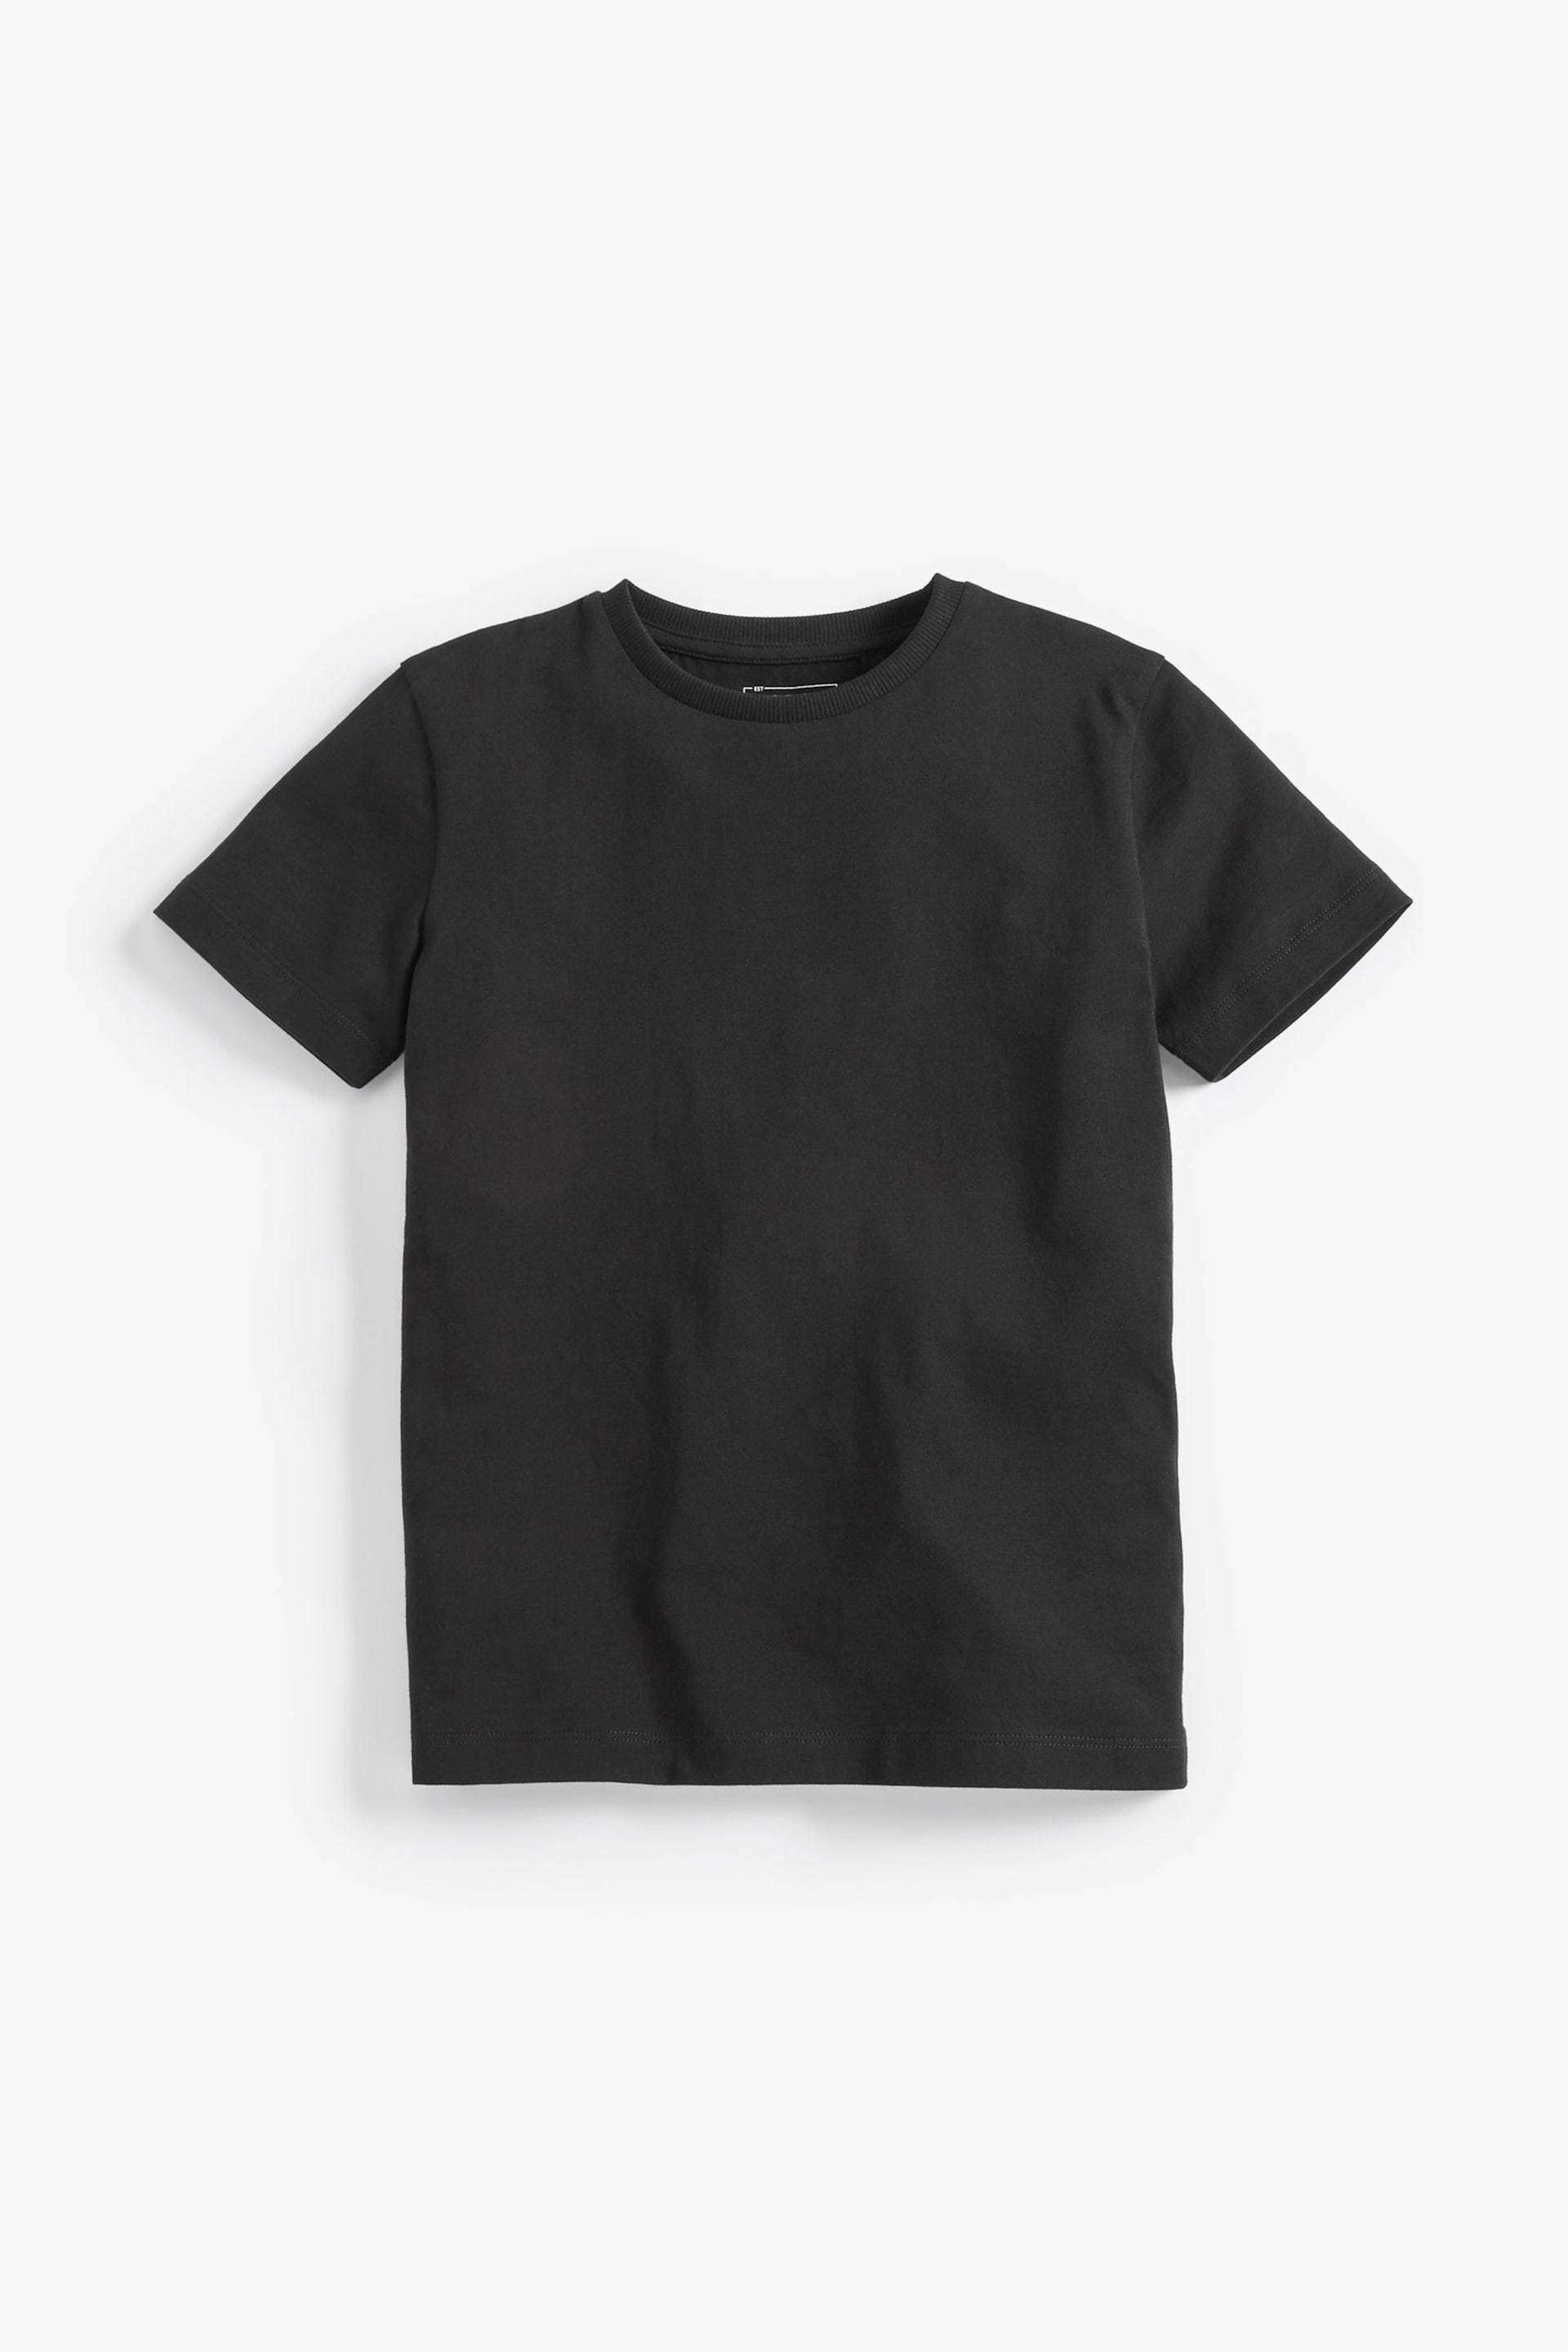 Black Short Sleeve Cotton T-Shirts 2 Pack (3-16yrs) - Image 2 of 4